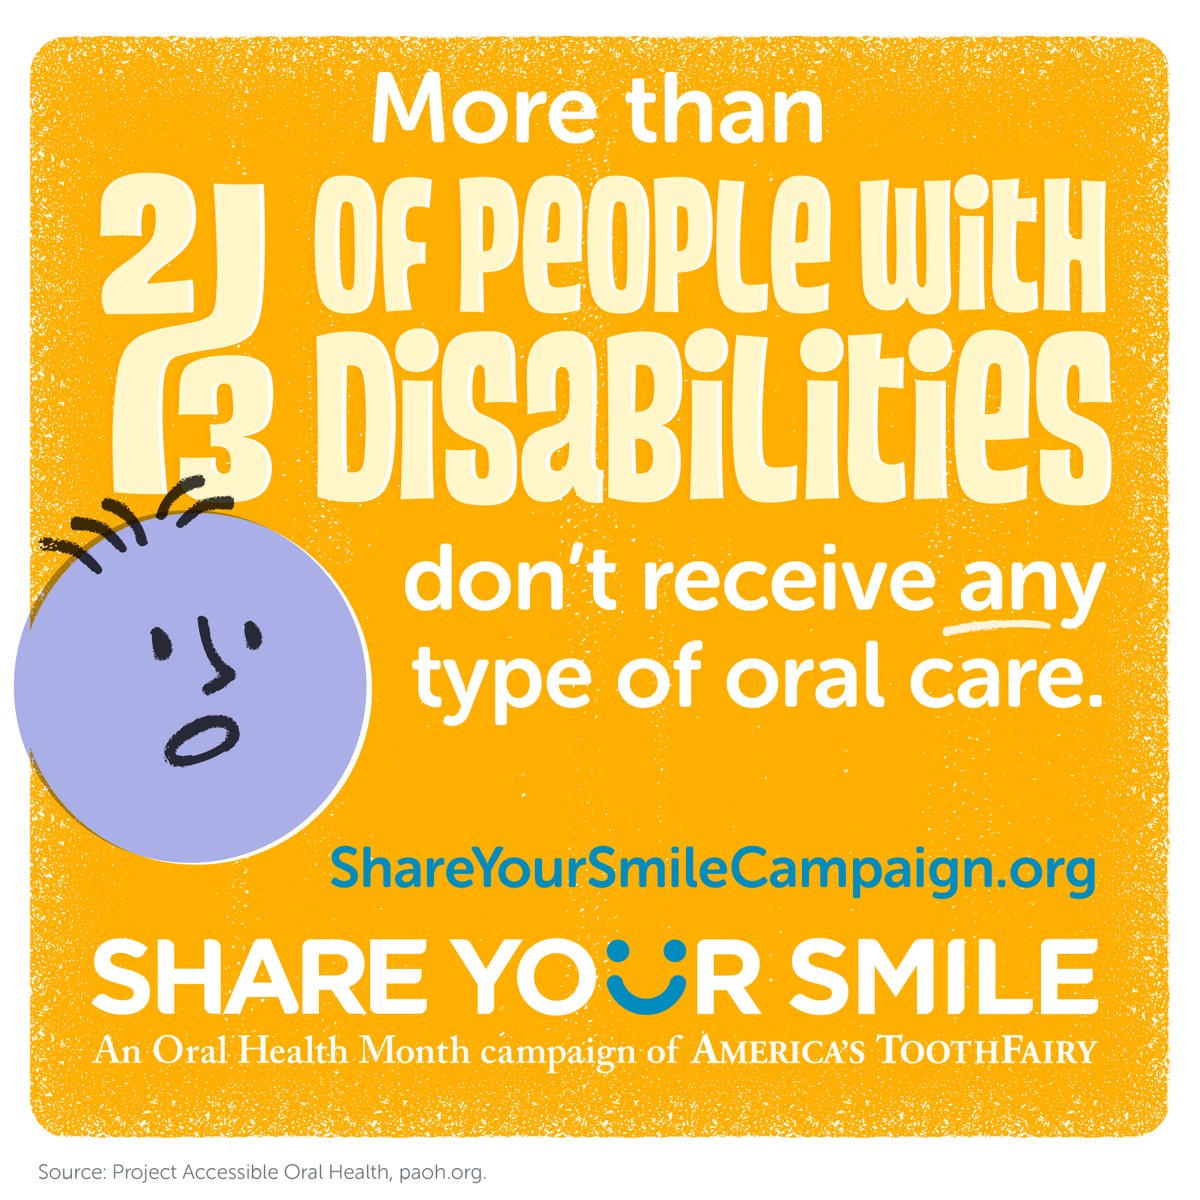 Dental care is the #1 unmet healthcare need for people w/disabilities resulting in higher rates of dental disease.
This June join us, @DentaQuest and @SunLife to spread awareness about oral health disparity.
Click our 🙂 Share Your Smile Campaign Updates link for reminders.